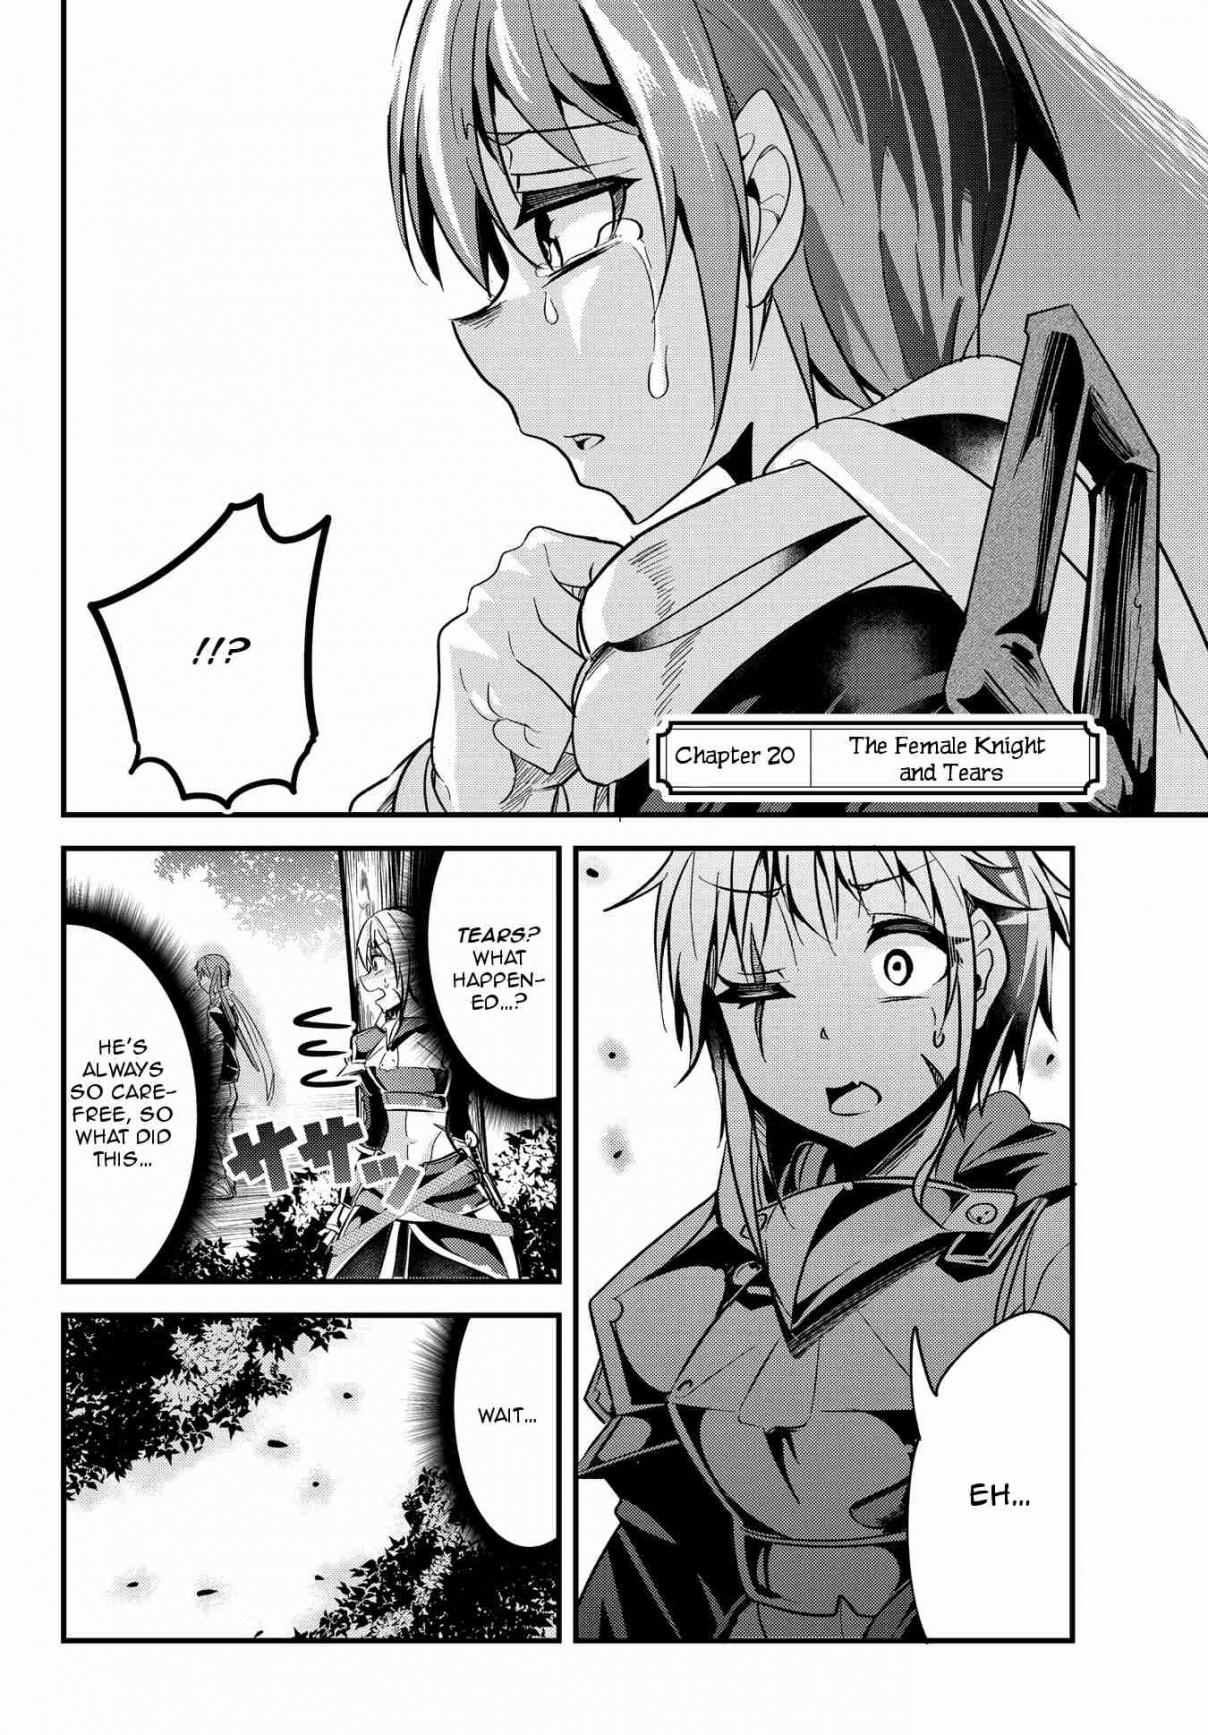 A Story About Treating a Female Knight, Who Has Never Been Treated as a Woman, as a Woman Ch. 20 The Female Knight and Tears